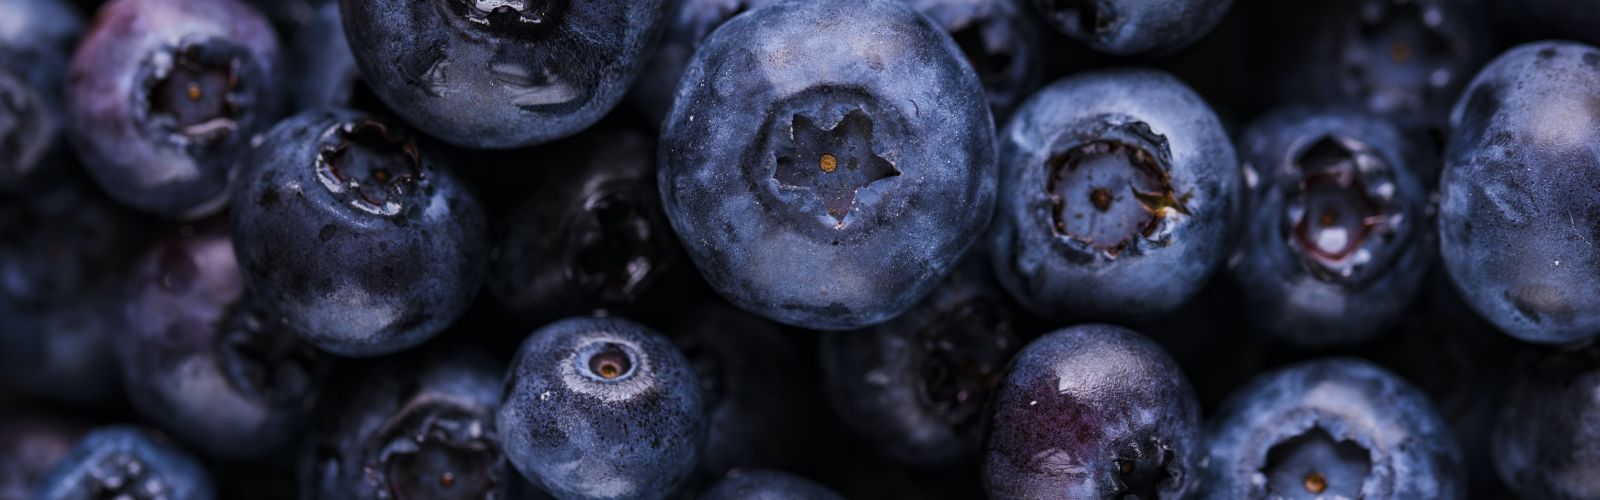 a close up of blueberries